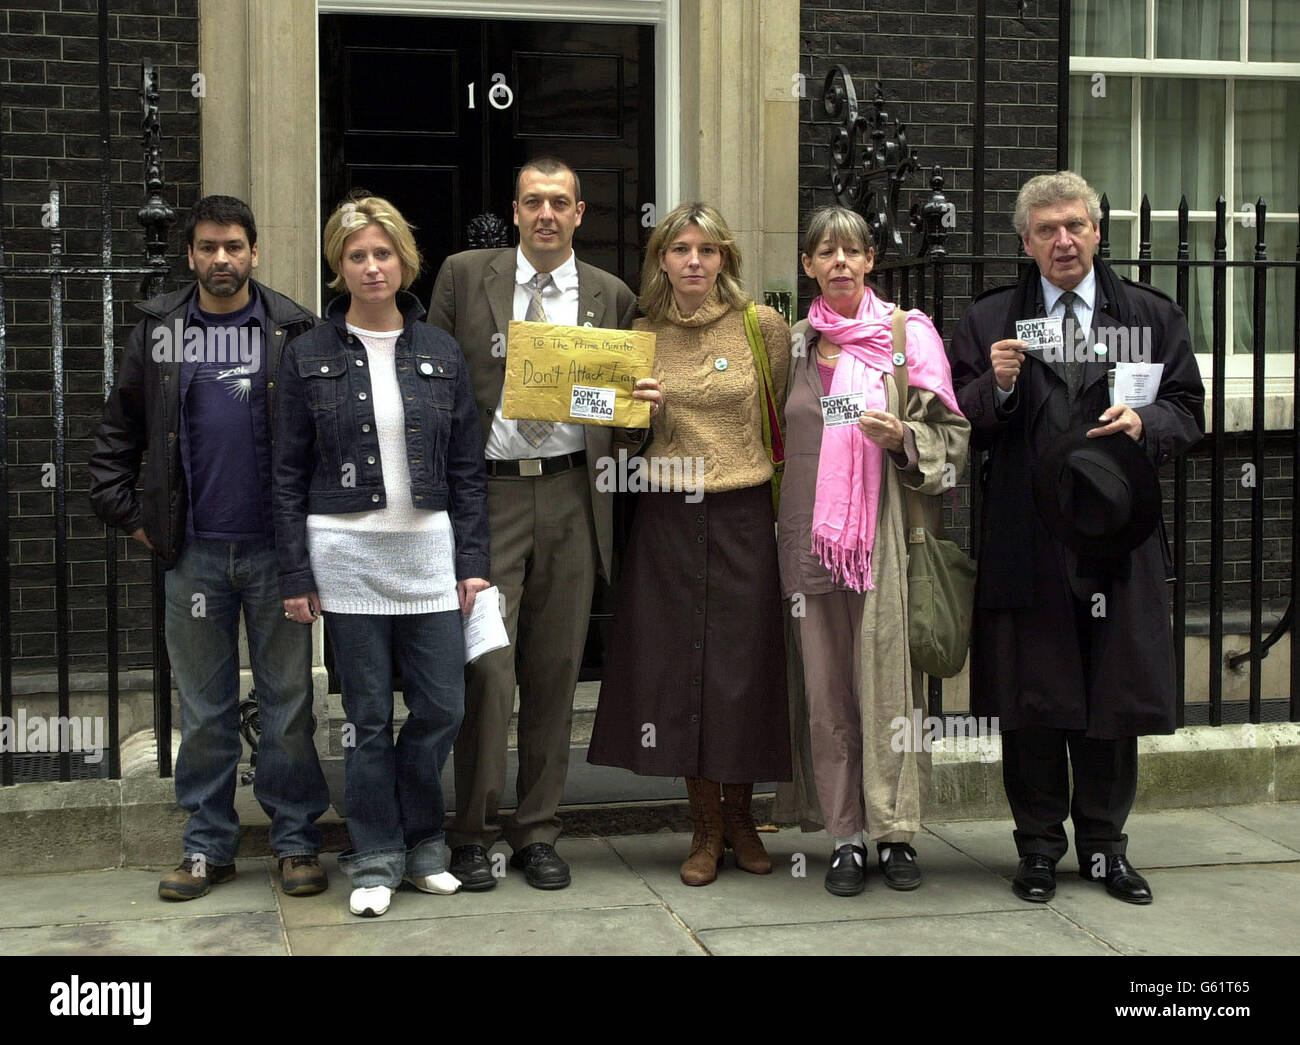 (l-r) musician Pandit G, actress Susannah Harker, National Union of Journalists General Secretary Jeremy Dear, actresses Jemma Redgrave and Frances de la Tour and actor Malcolm Tierney on the doorstep of 10 Downing Street, London, * ...where they handed over an open letter to the Government urging it not to back a war against Iraq. More than 100 actors, writers, musicians and playwrights had signed the letter, which condemns military action as unjustifiable and with potentially horrific ramifications. Stock Photo